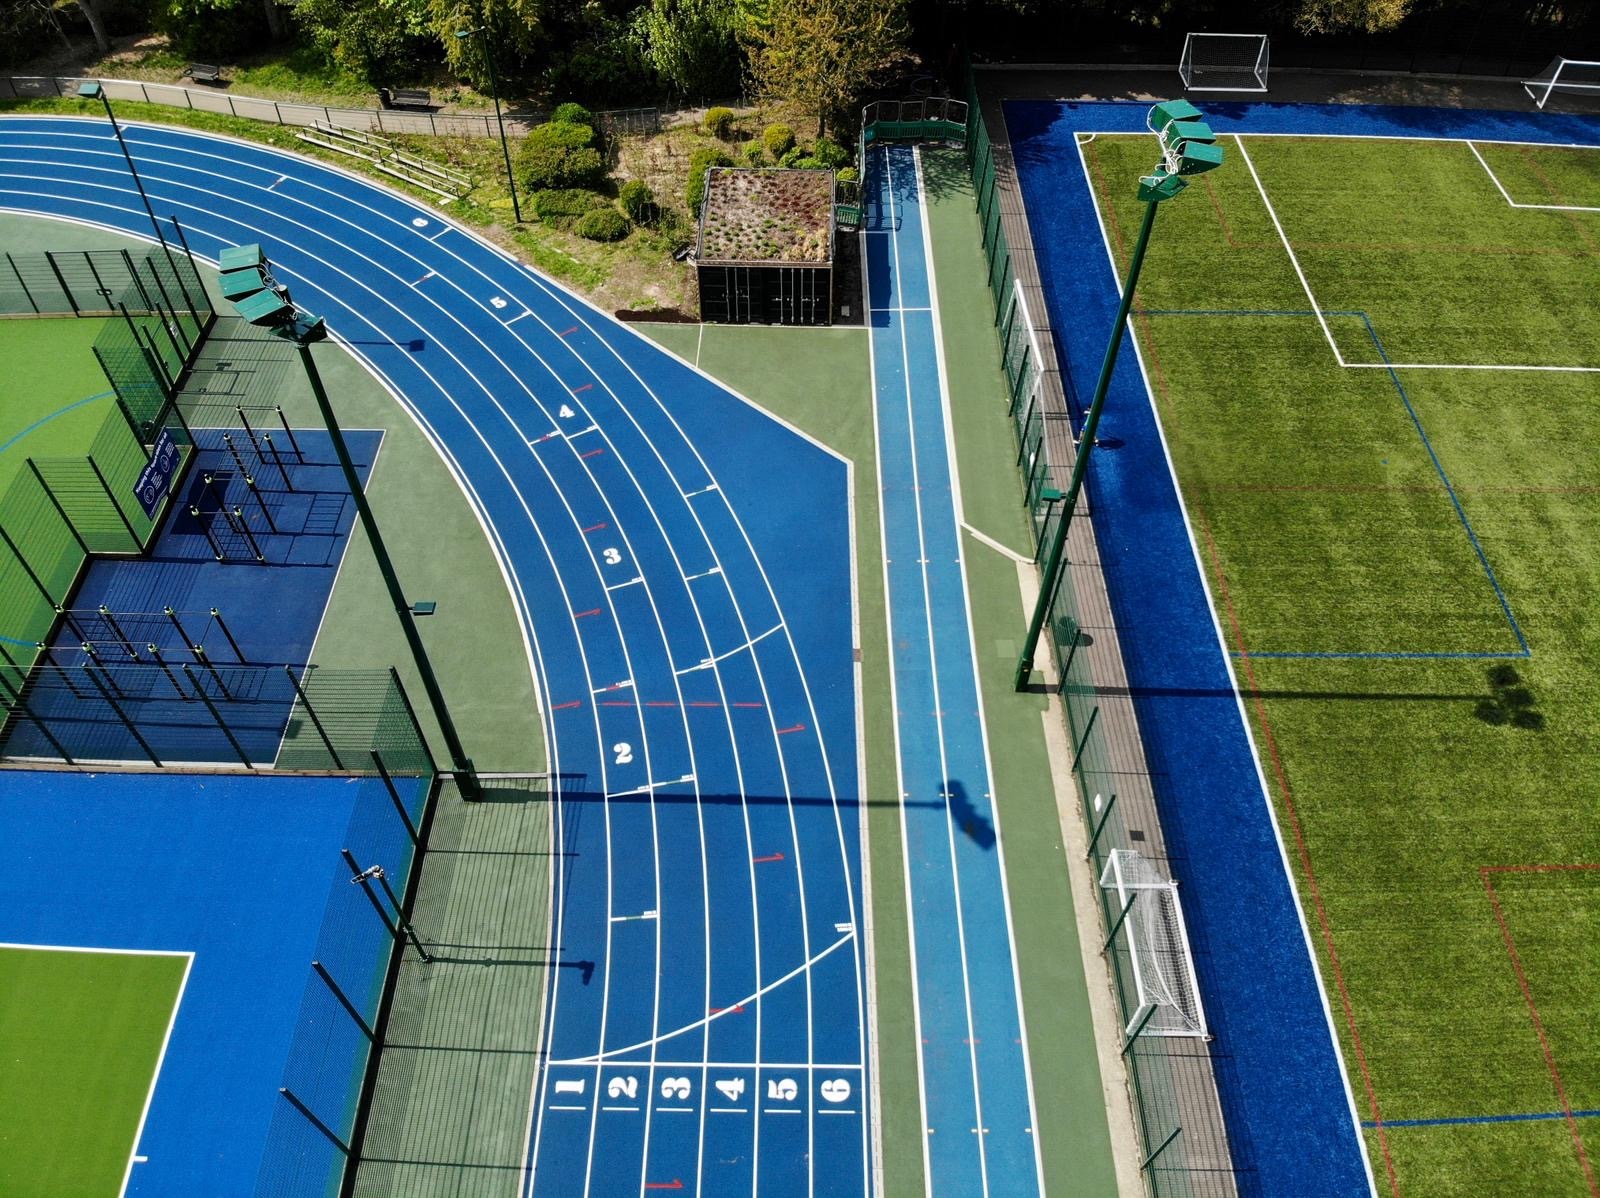 ETC Sports Surfaces Ltd completed the polymeric surface installation on time and on budget at the beginning of 2022.